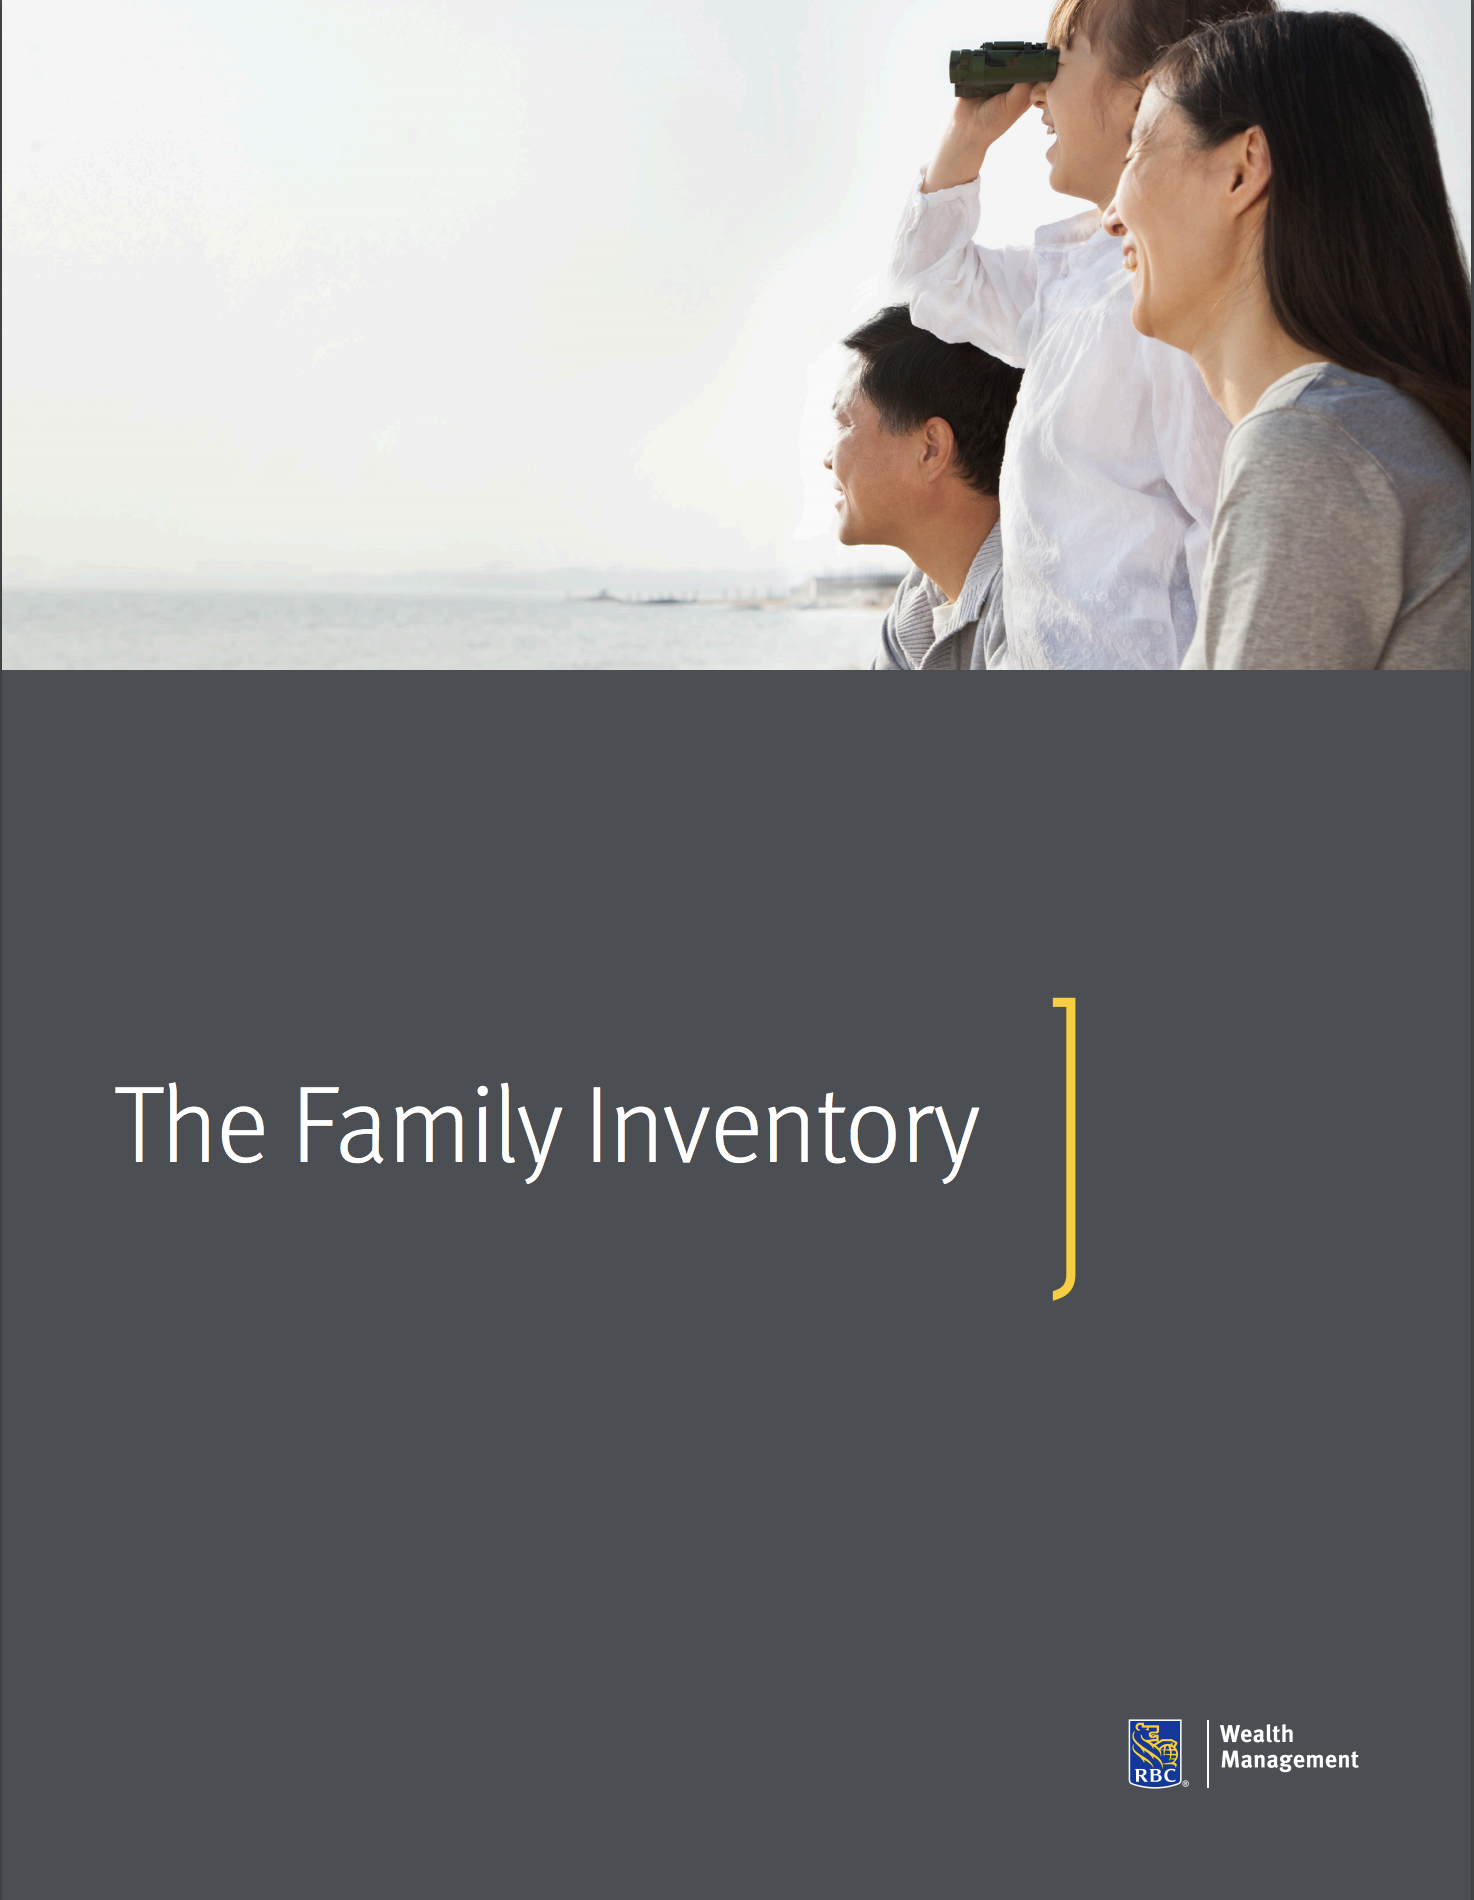 The Family Inventory